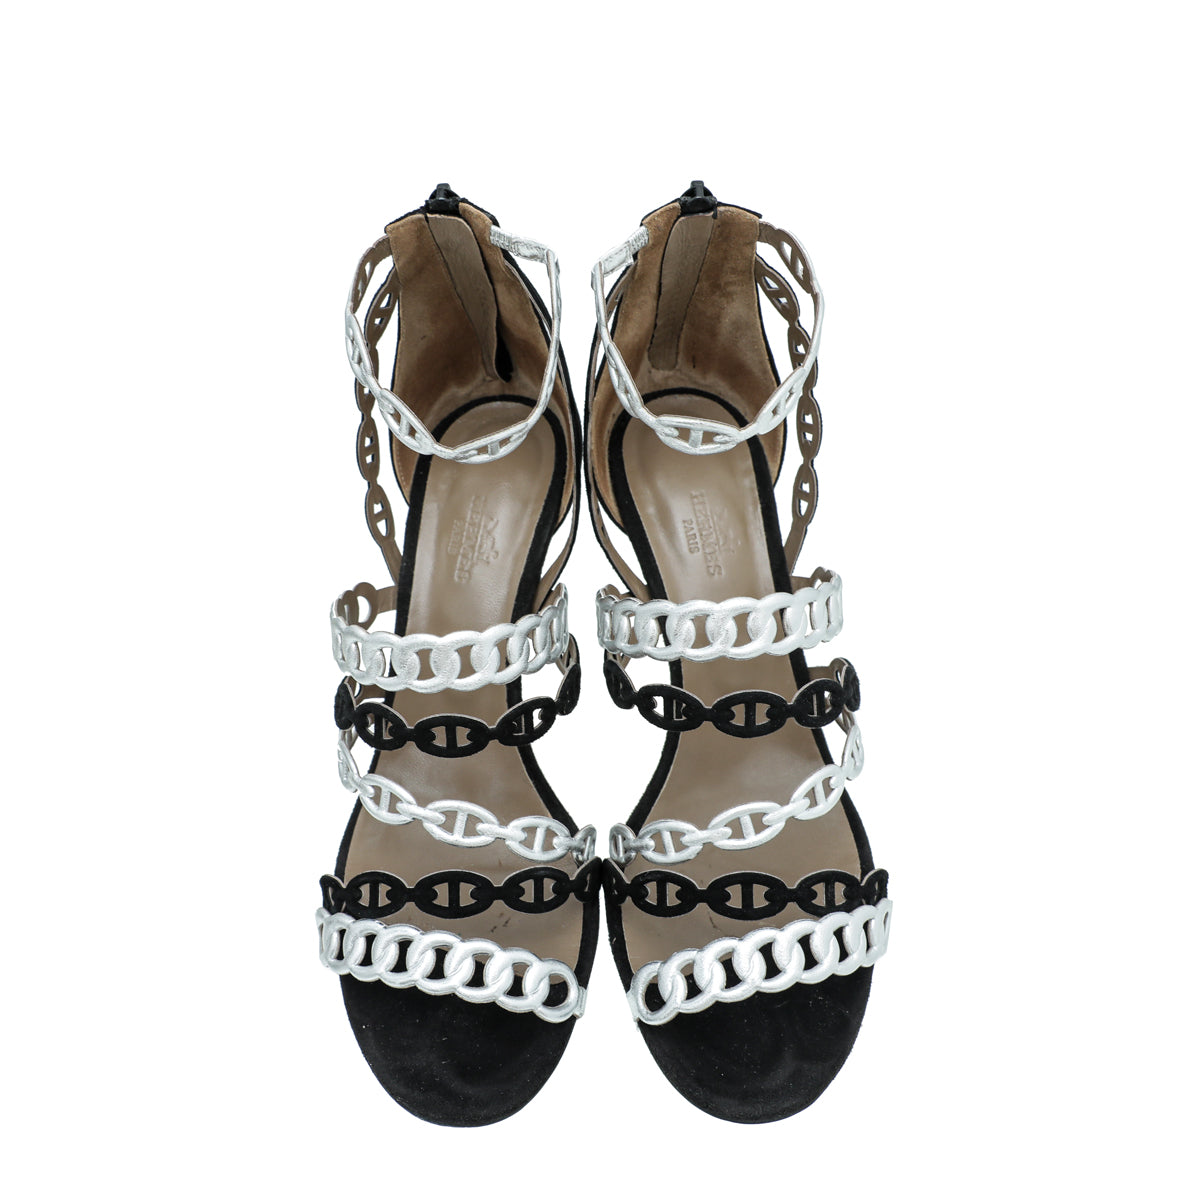 Hermes Bicolor Chaine D'ancre Romy Sandals 38